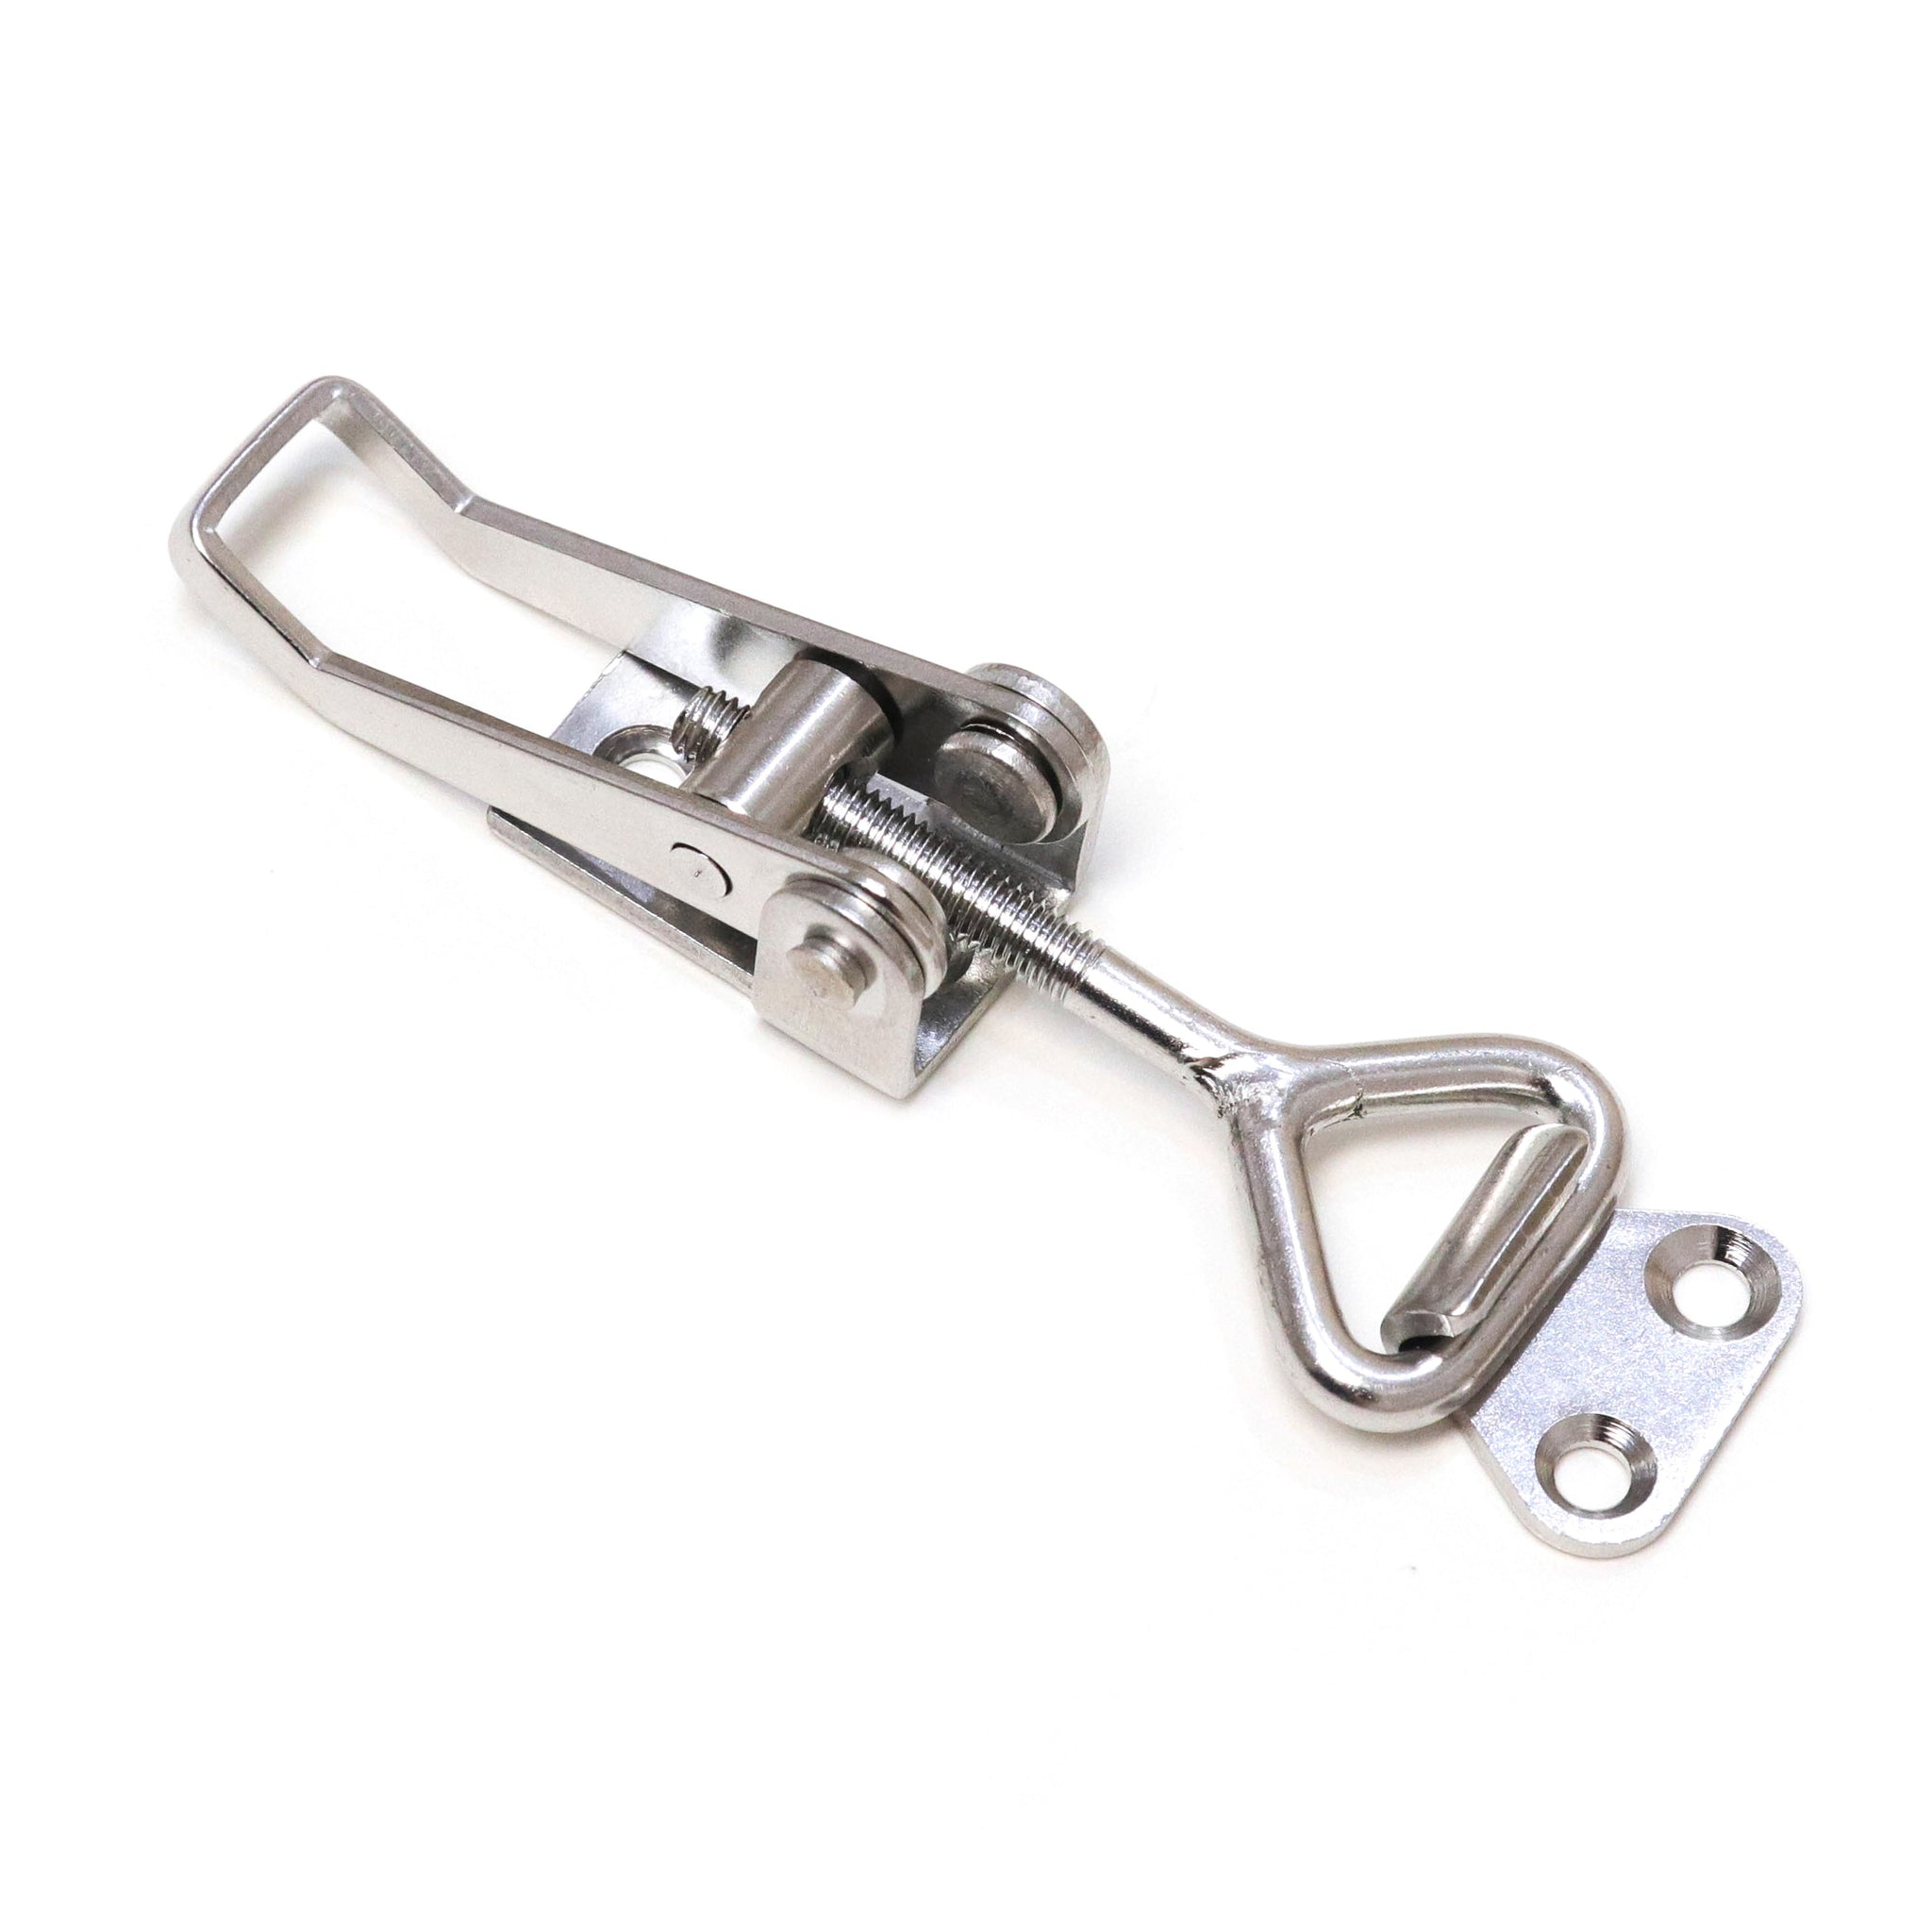 Red Hound Auto Pull Latch Toggle Clamp Adjustable 304 Stainless Steel Marine Grade for Cabinets Doors Storage Boxes and More 2-1/8 Inch 54 mm